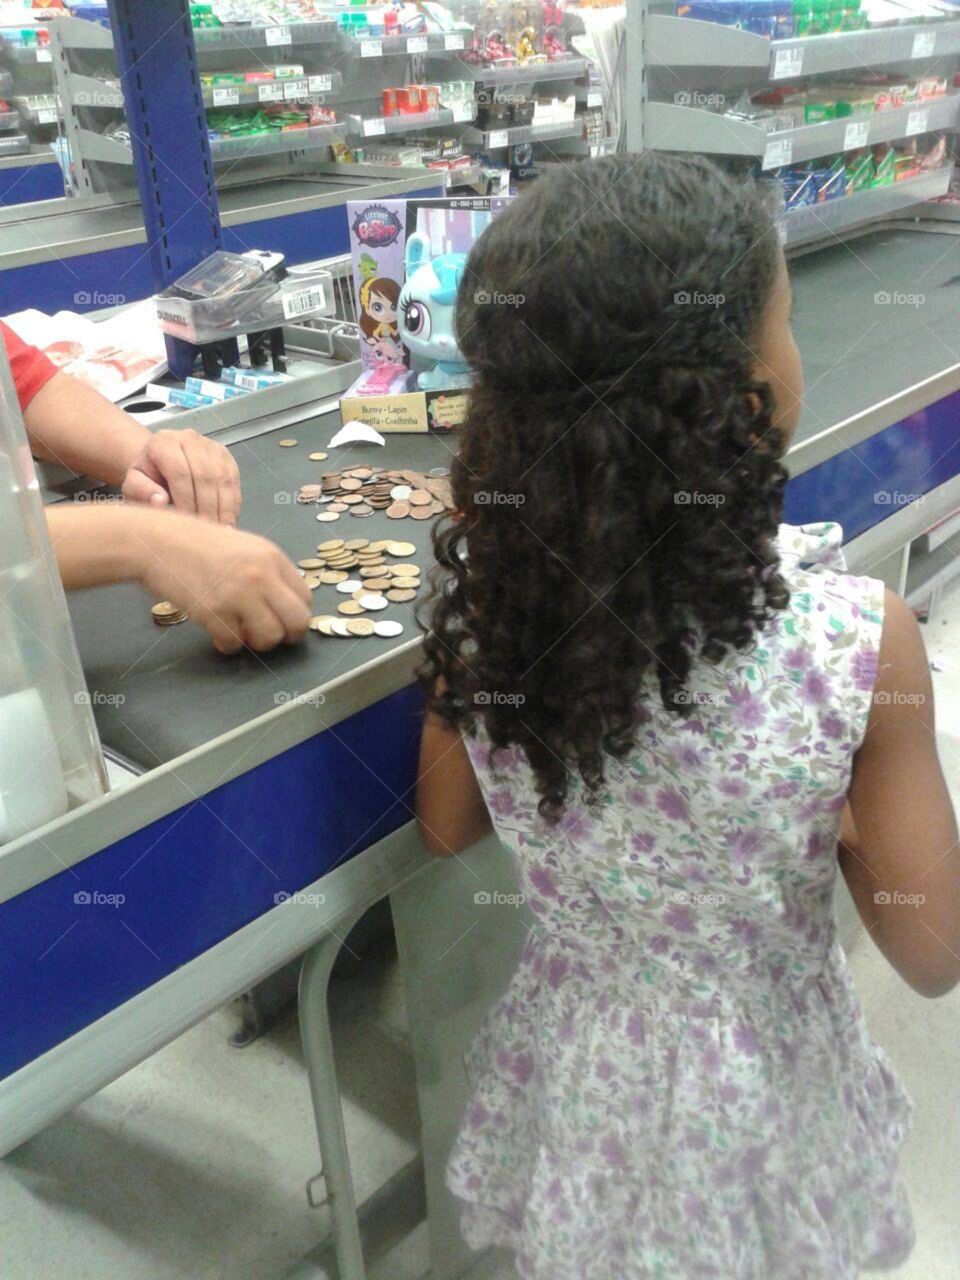 Shopping with money from piggy bank